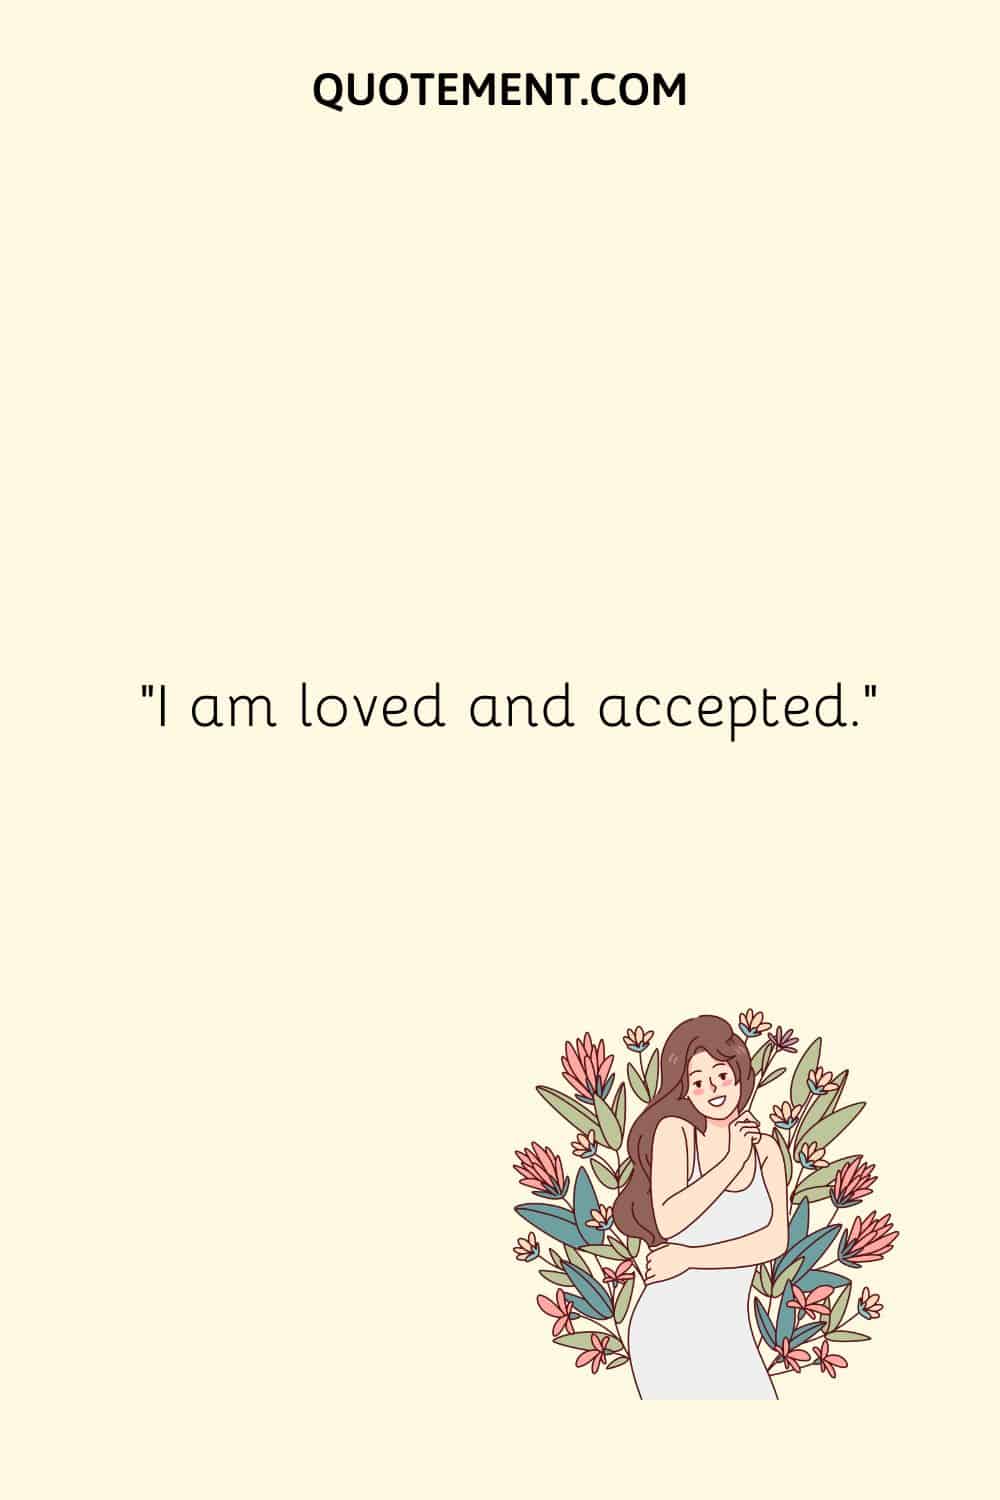 I am loved and accepted.